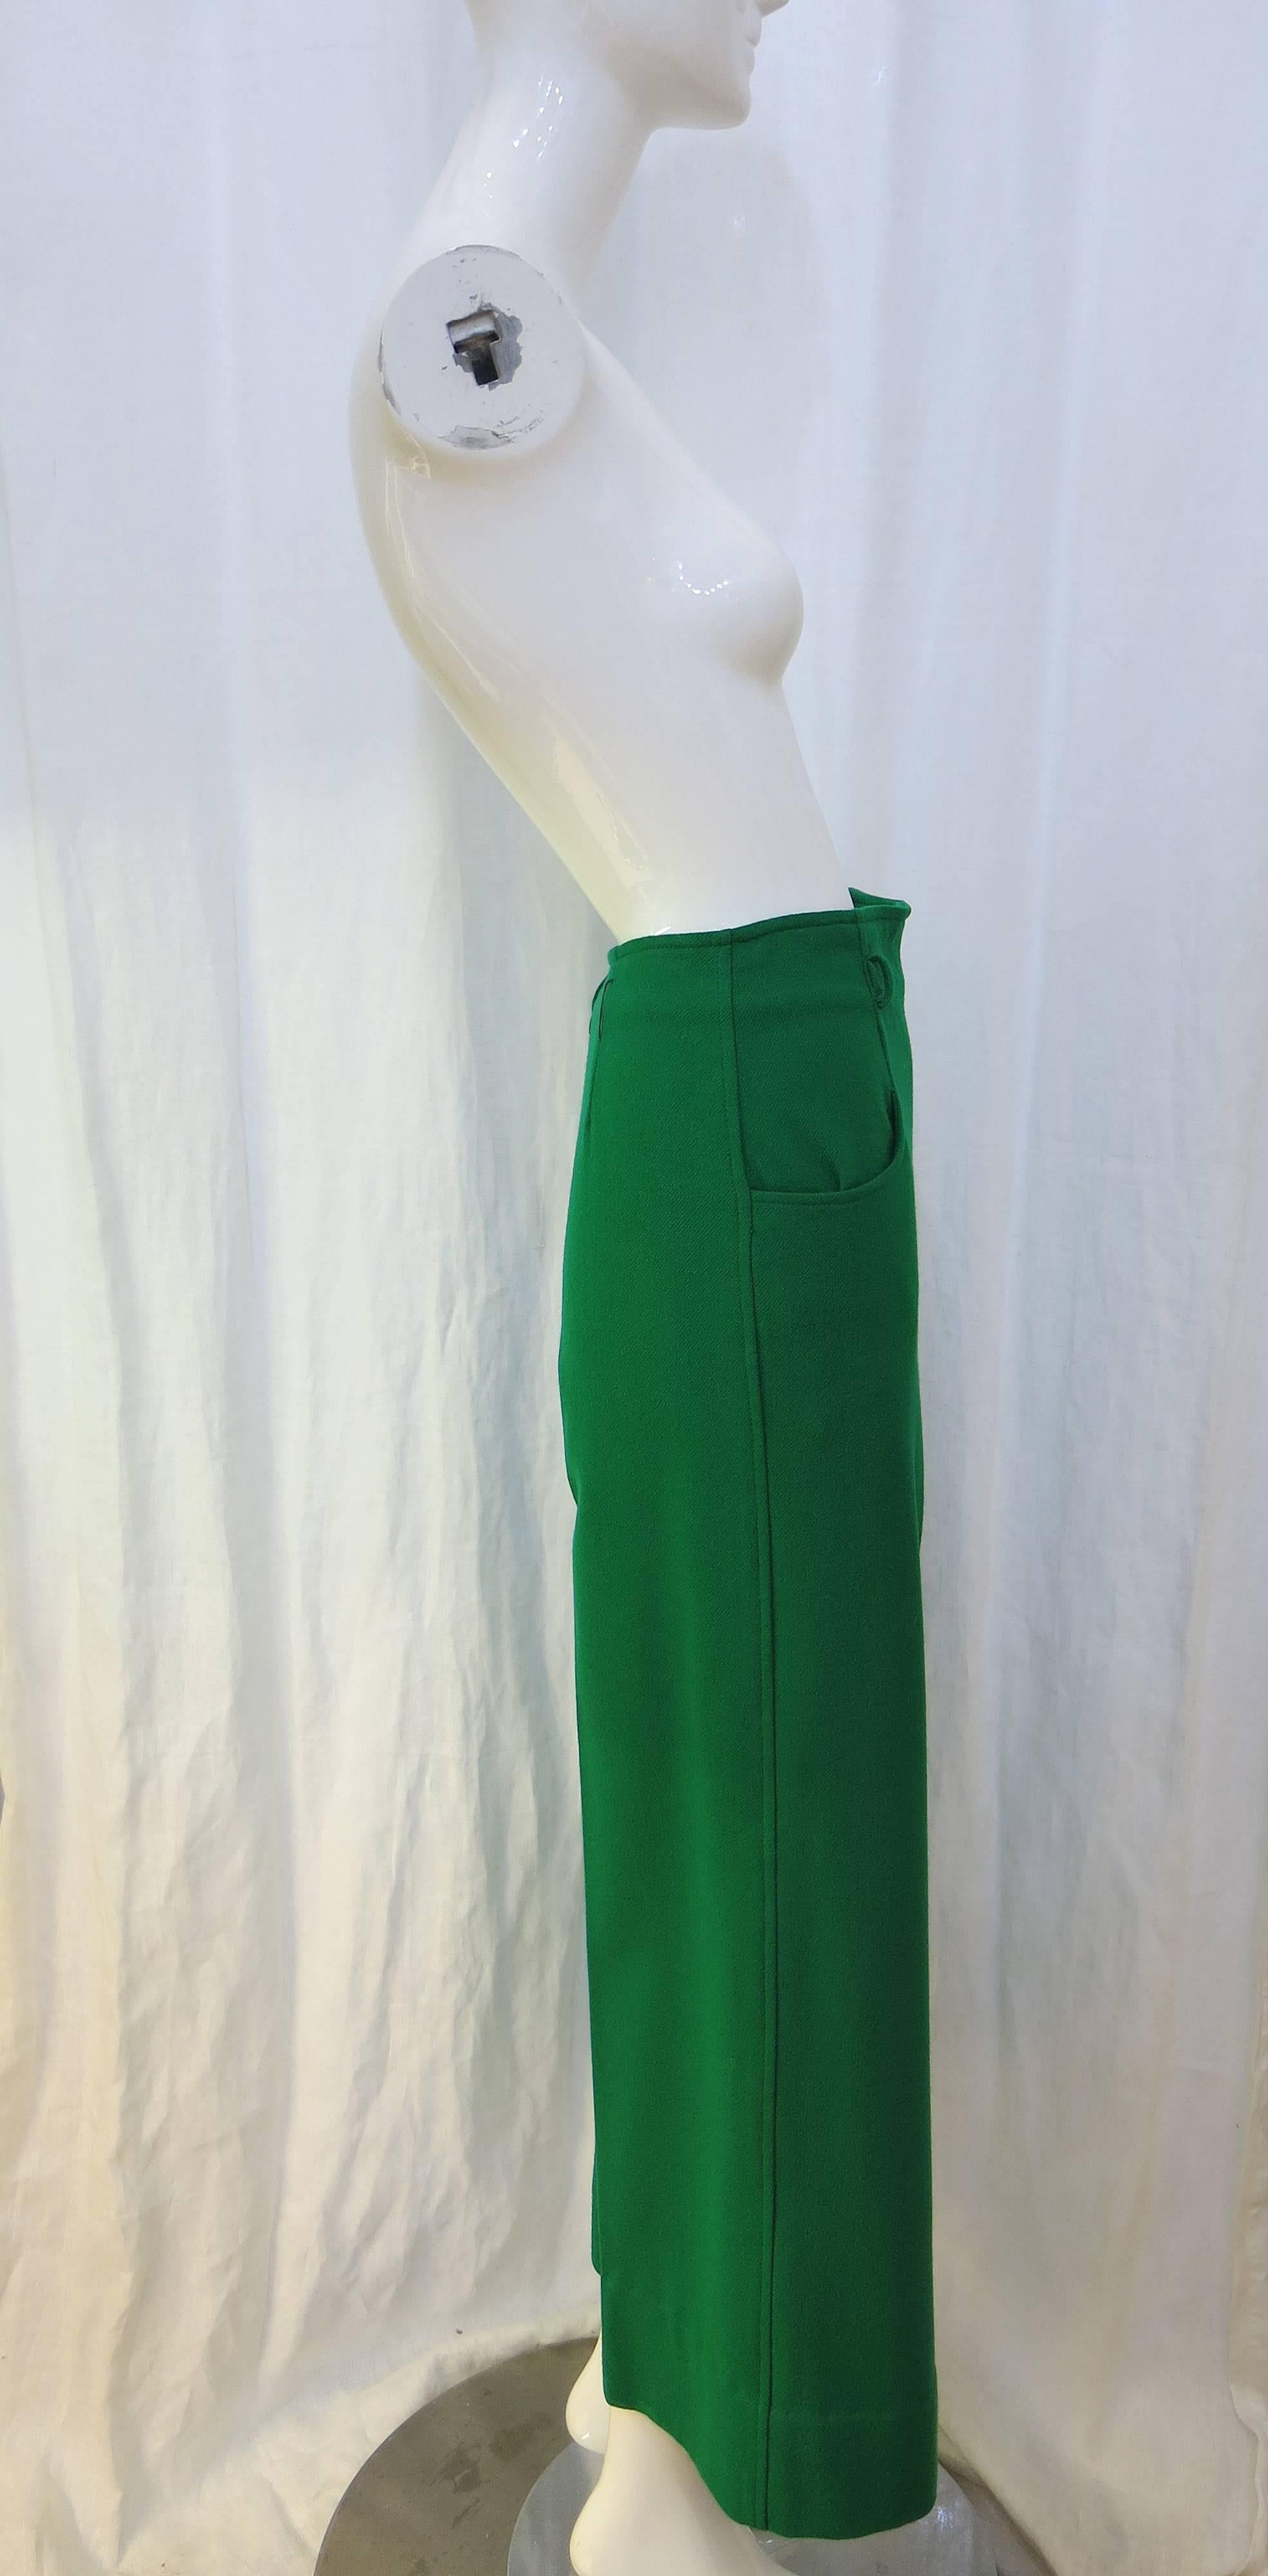 High waisted, pleated, straight leg wool trousers with front pockets. Marked as size 6 but fits more like a size 2 (please refer to measurements).

A wonderful kelly green pant that could be dressed up or down. Would pair well with a crop top for